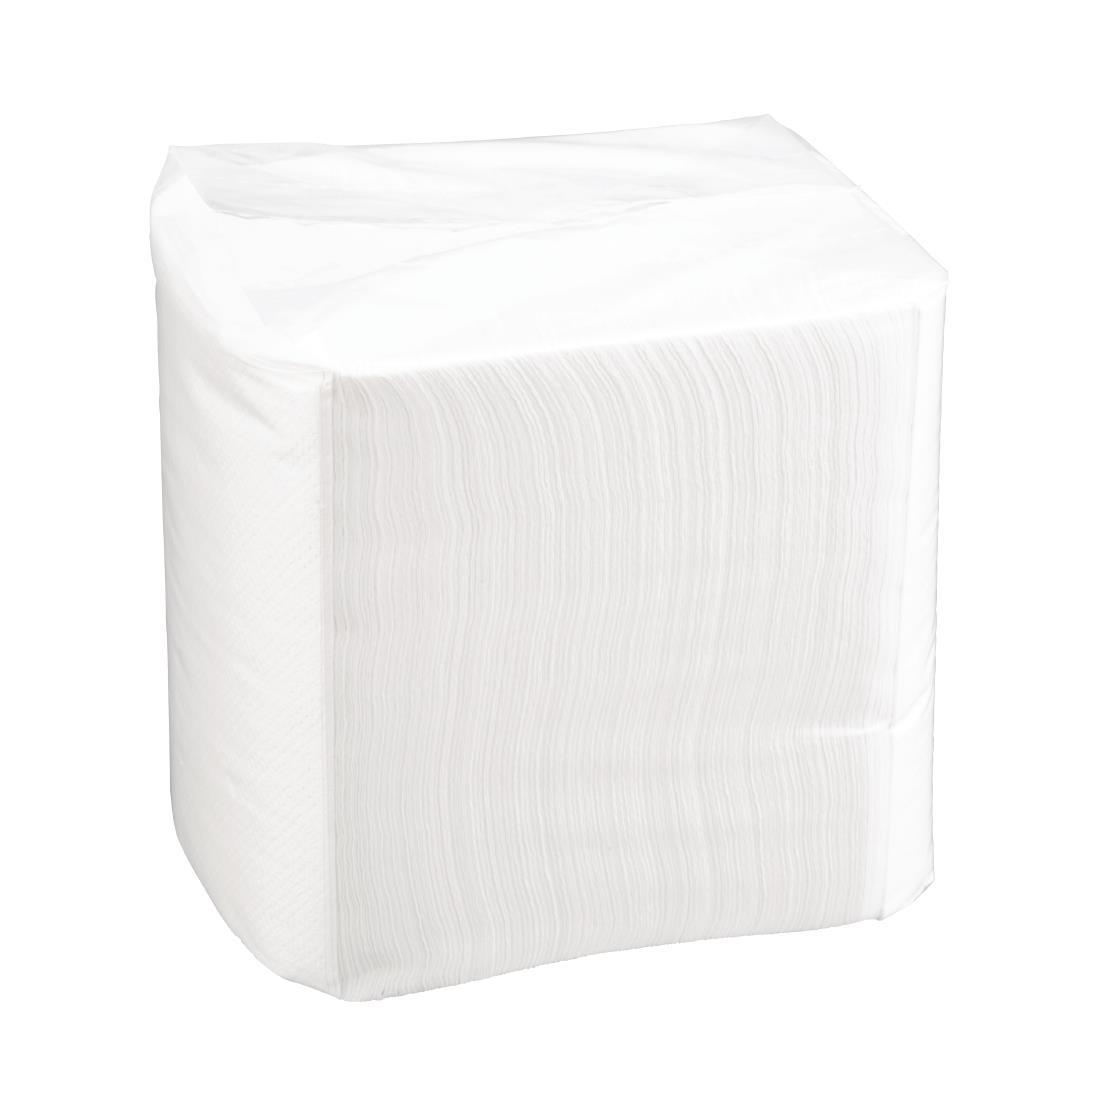 Fiesta Recyclable Cocktail Napkin White 24x24cm 1ply 1/4 Fold (Pack of 2000) - CM560  - 7